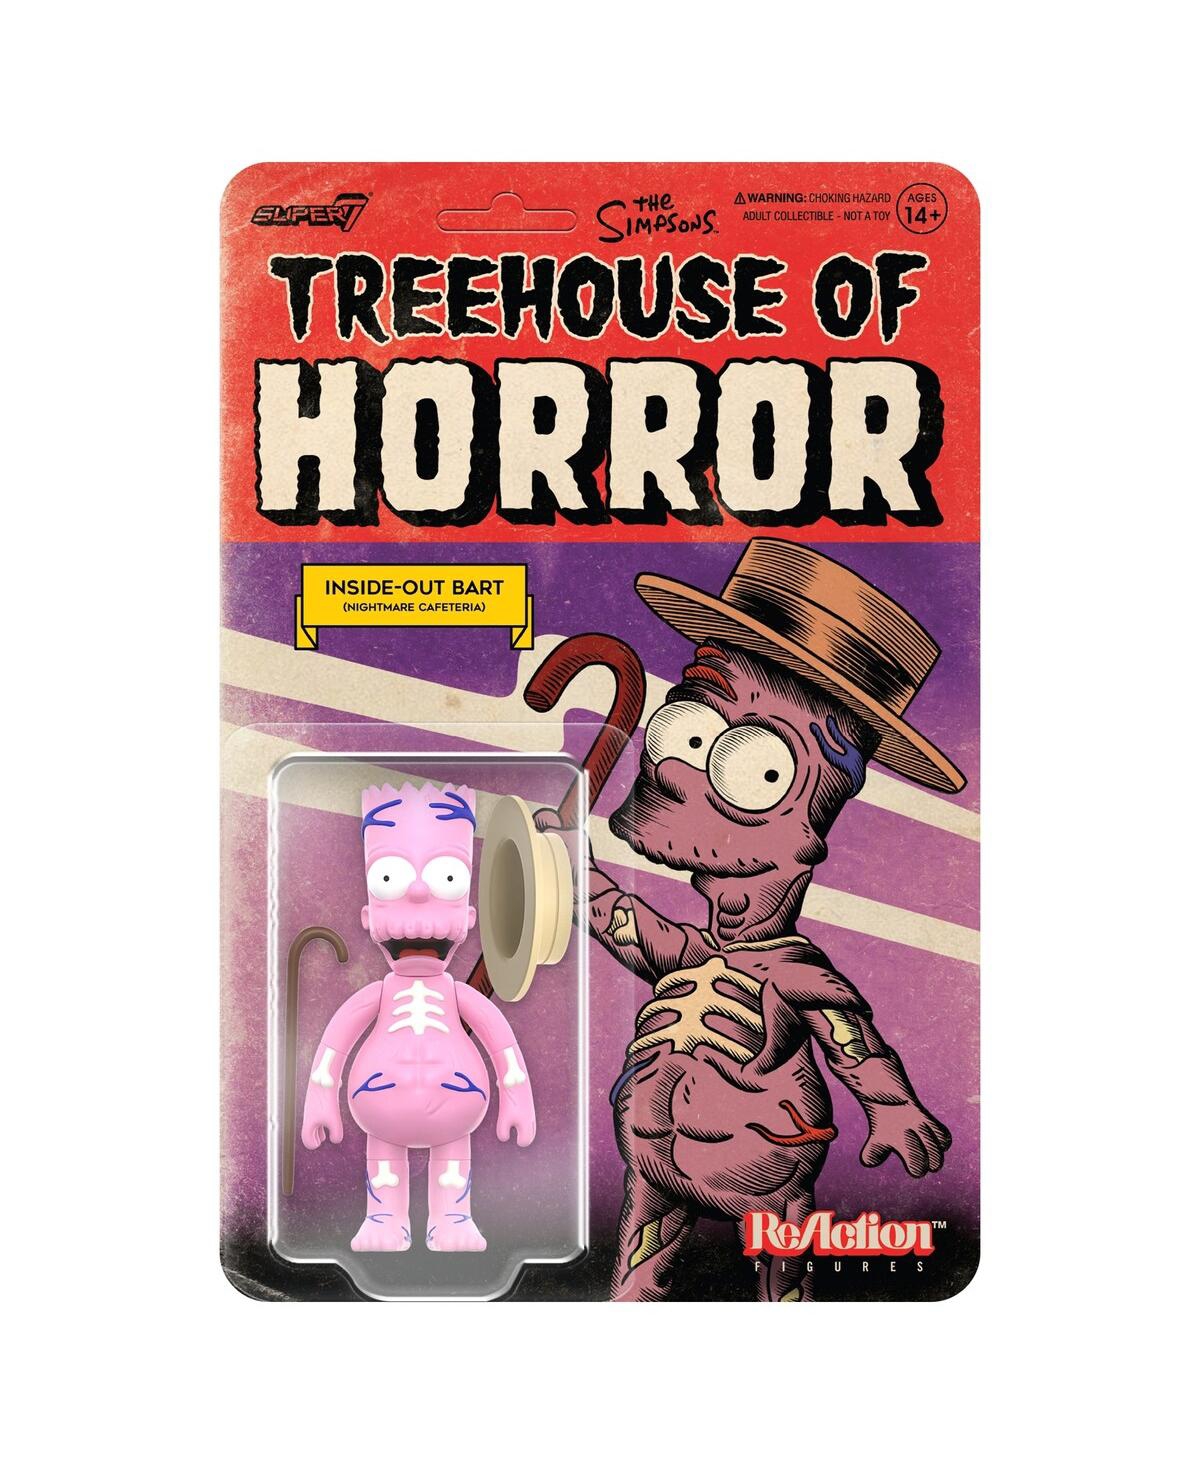 Super 7 Inside-out Bart The Simpsons Treehouse Of Horror Reaction Figure In Multi